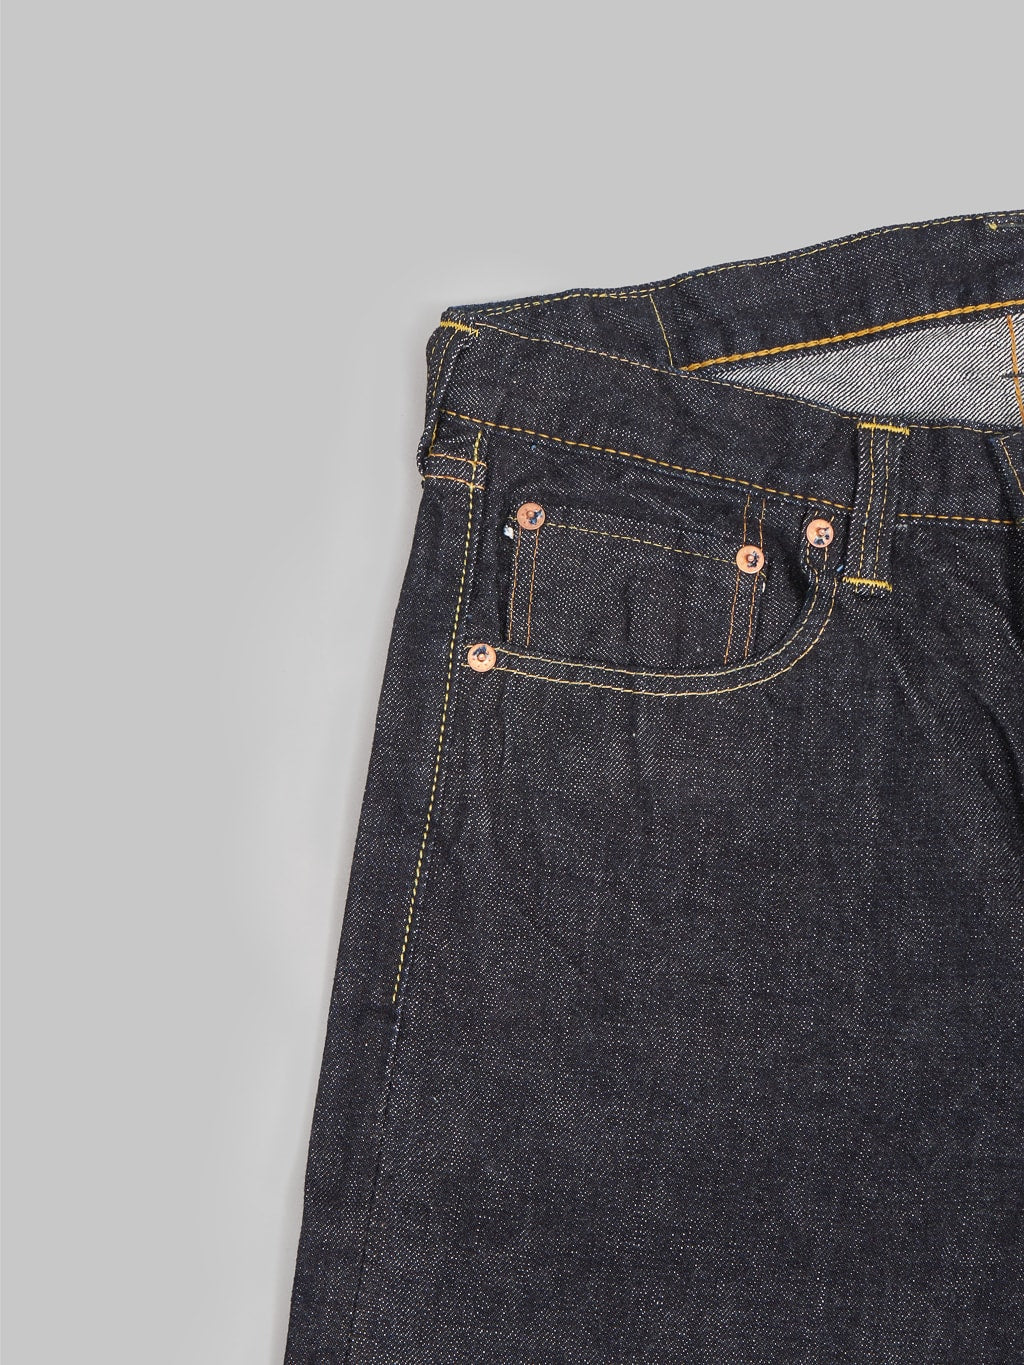 Fullcount 0105XW Wide Straight selvedge Jeans coin pocket